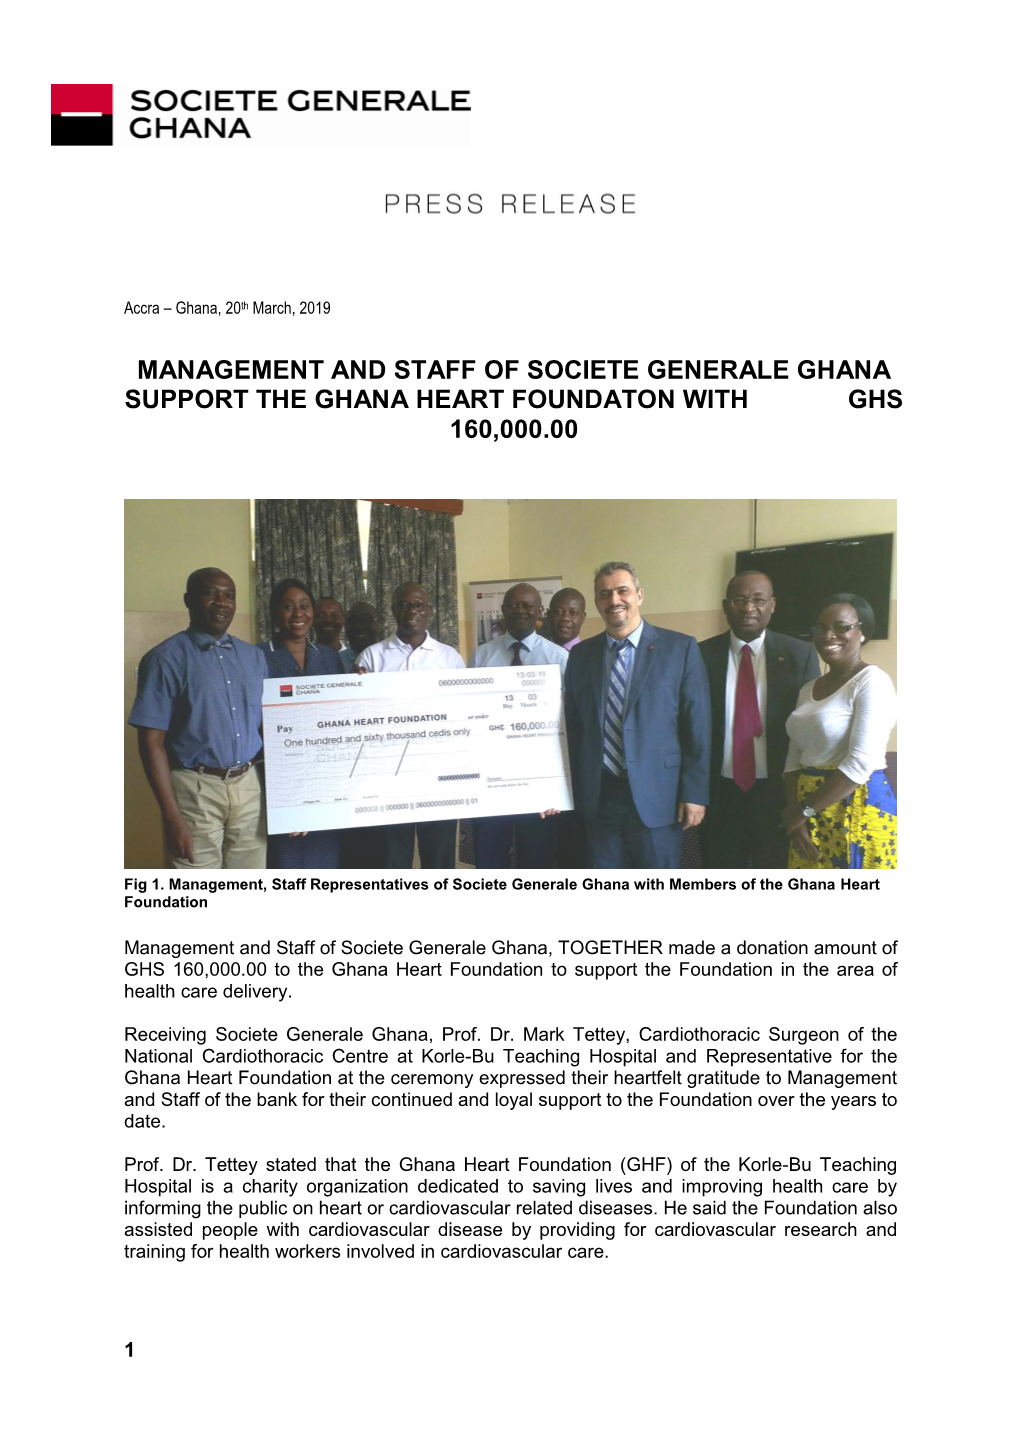 Management and Staff of Societe Generale Ghana Support the Ghana Heart Foundaton with Ghs 160,000.00